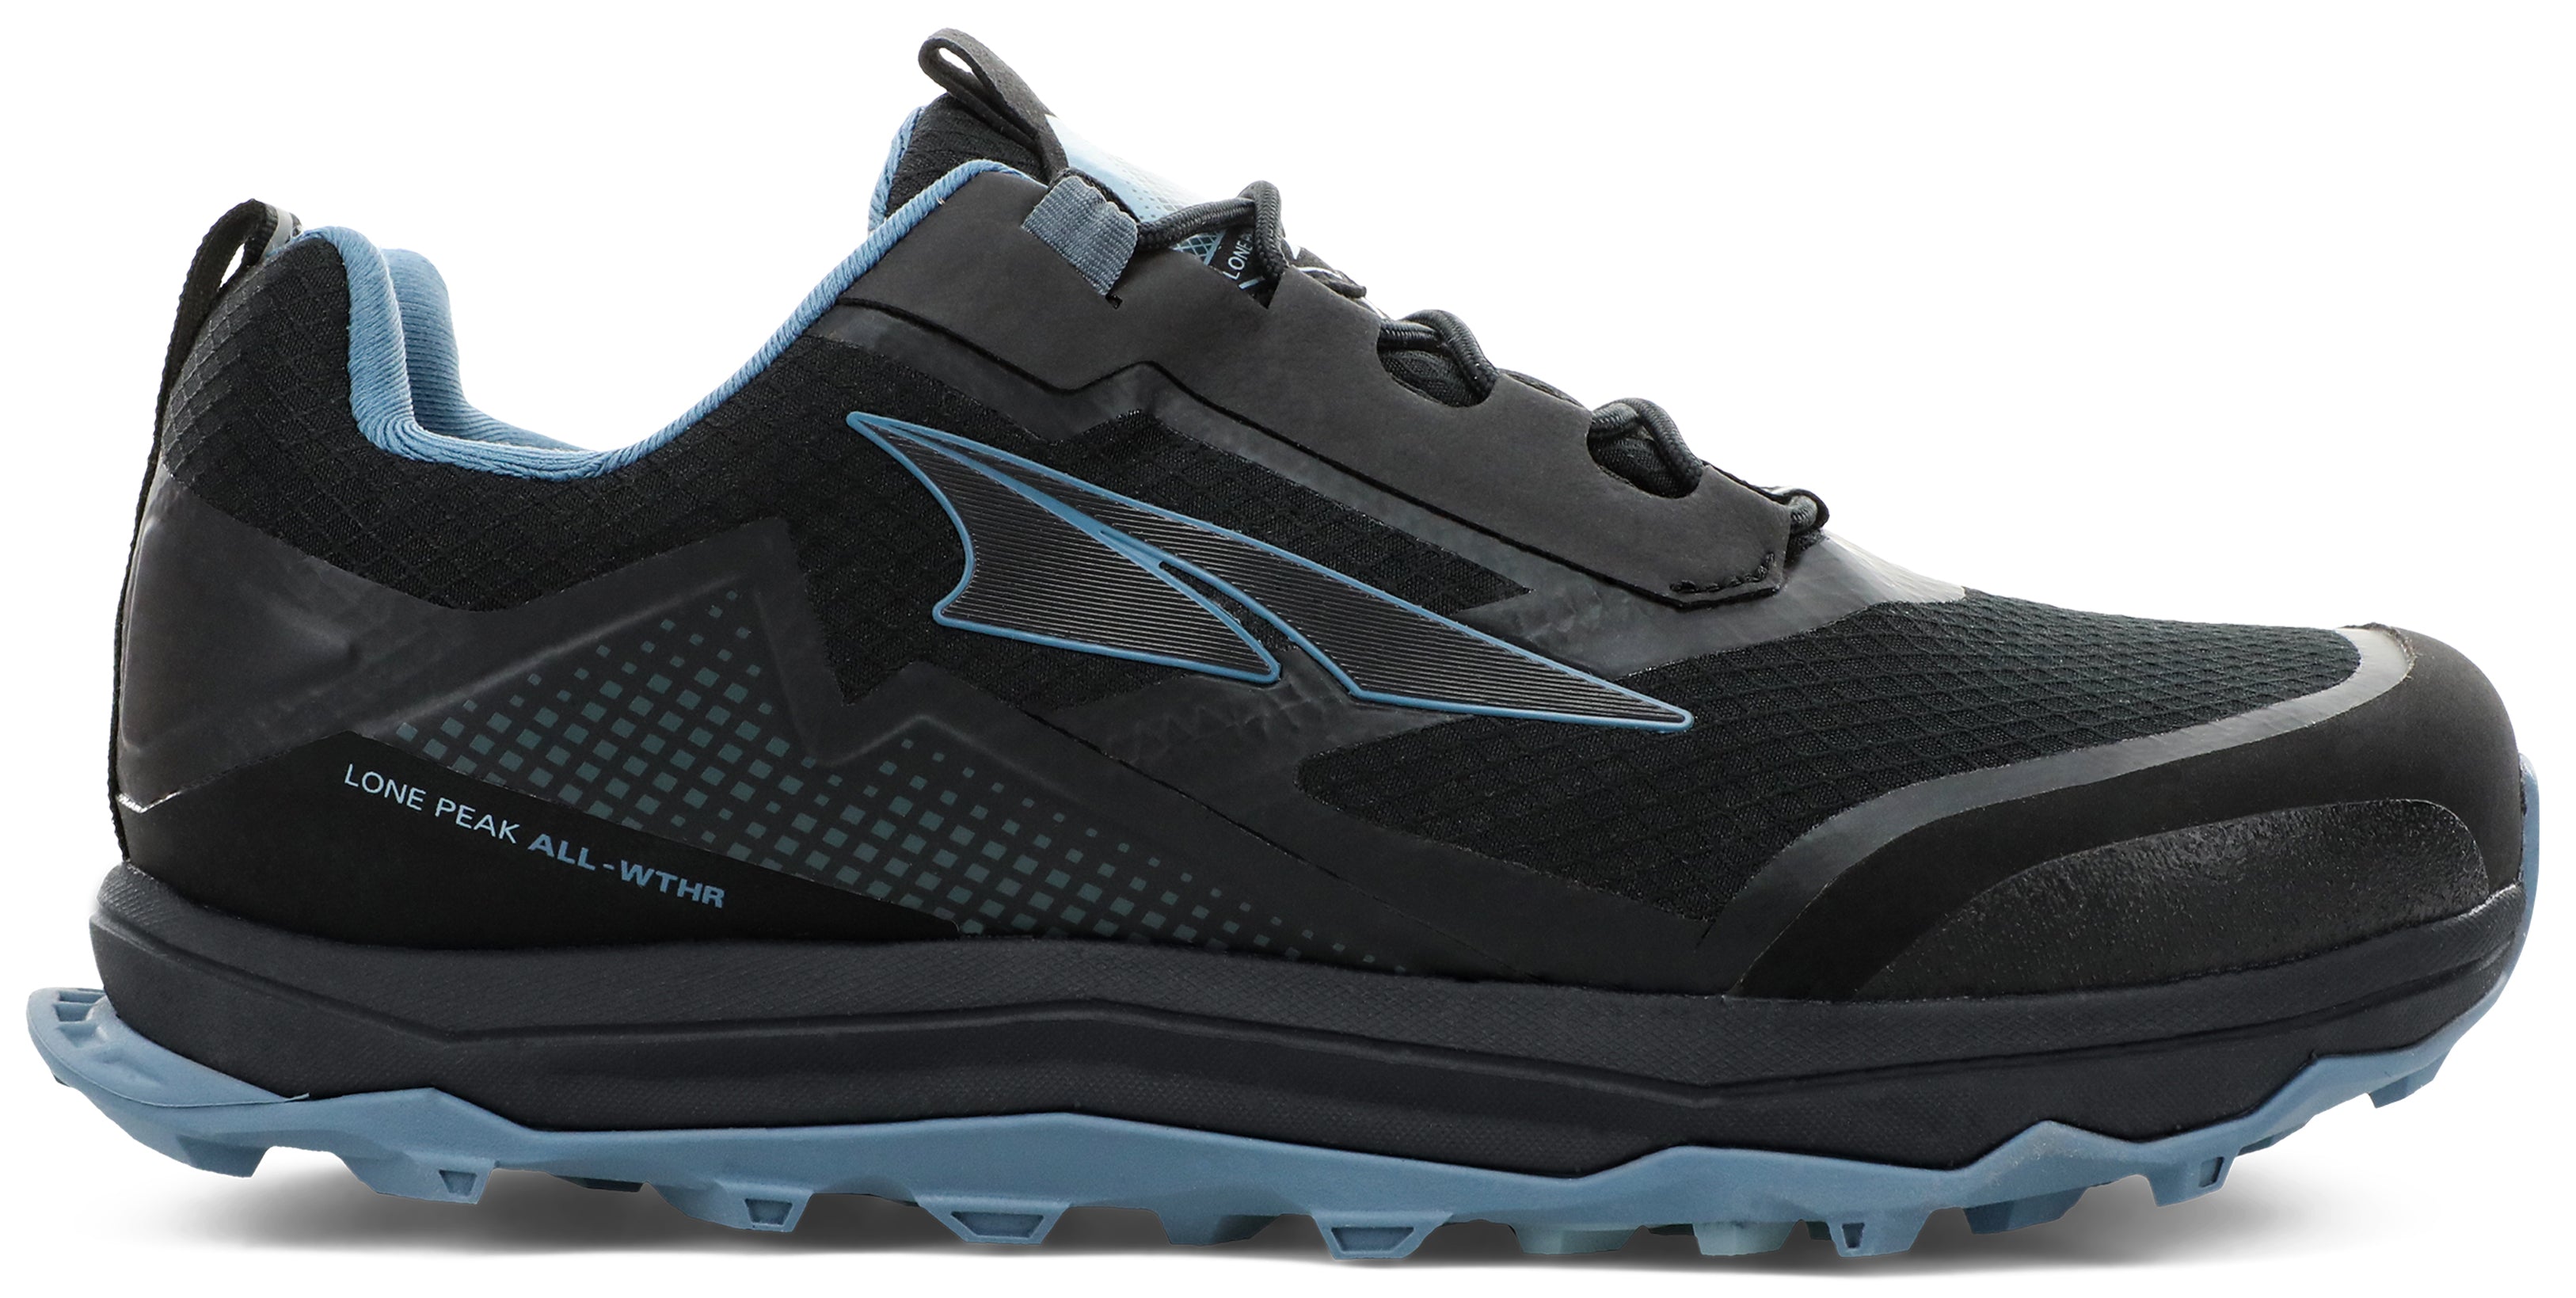 Altra Women's Lone Peak ALL-WTHR Low Trail Running Shoe in Black/Blue from the side